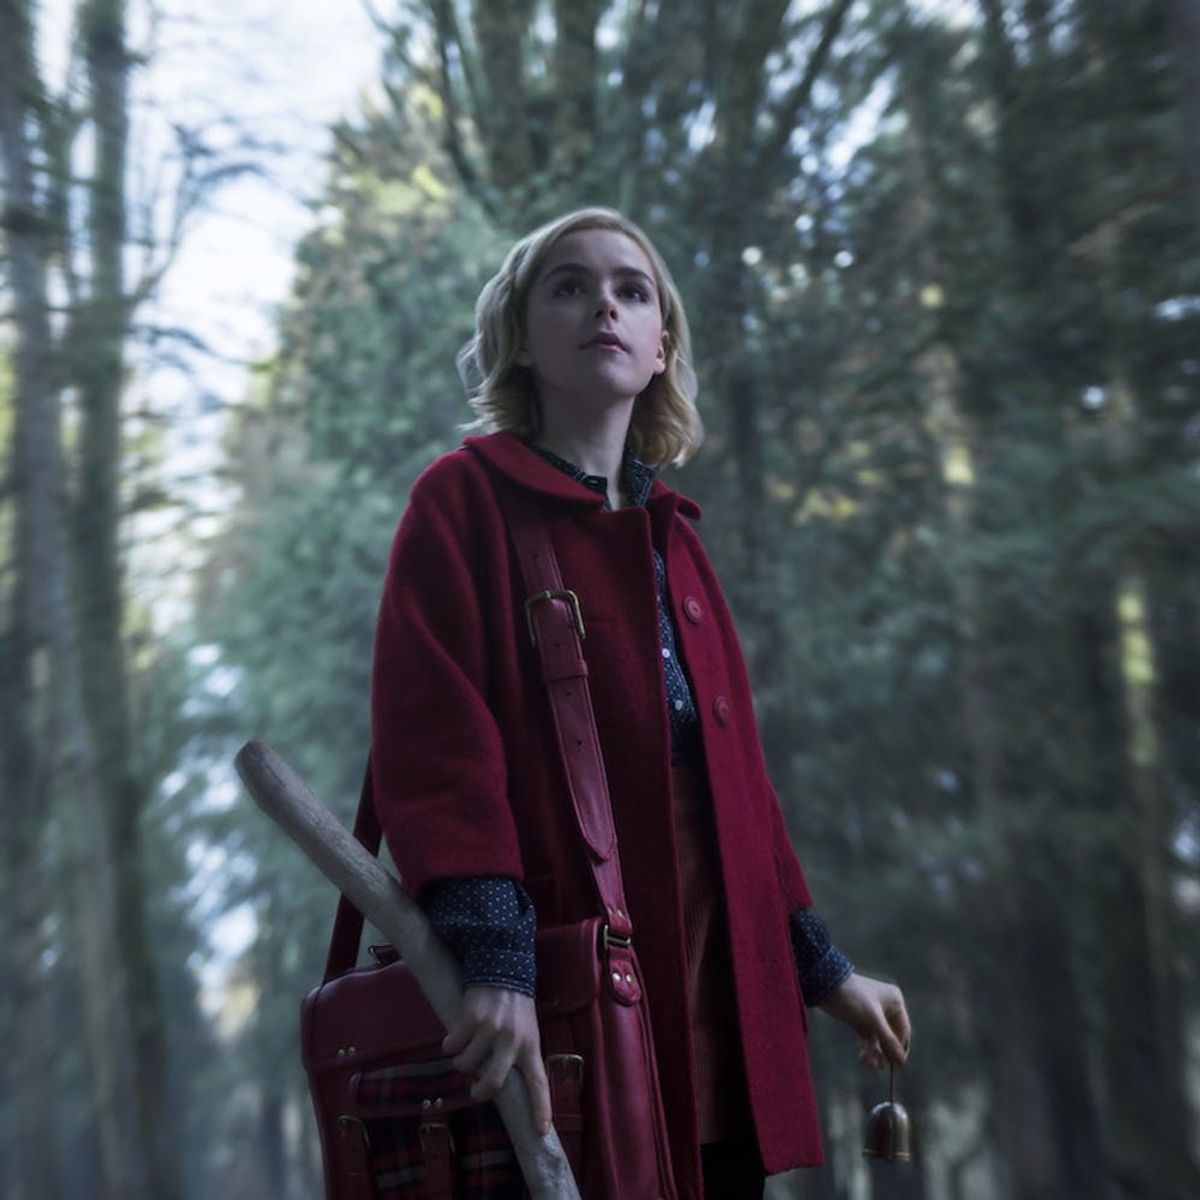 Here’s Your Spooky First Look at Kiernan Shipka in Netflix’s ‘Chilling Adventures of Sabrina’